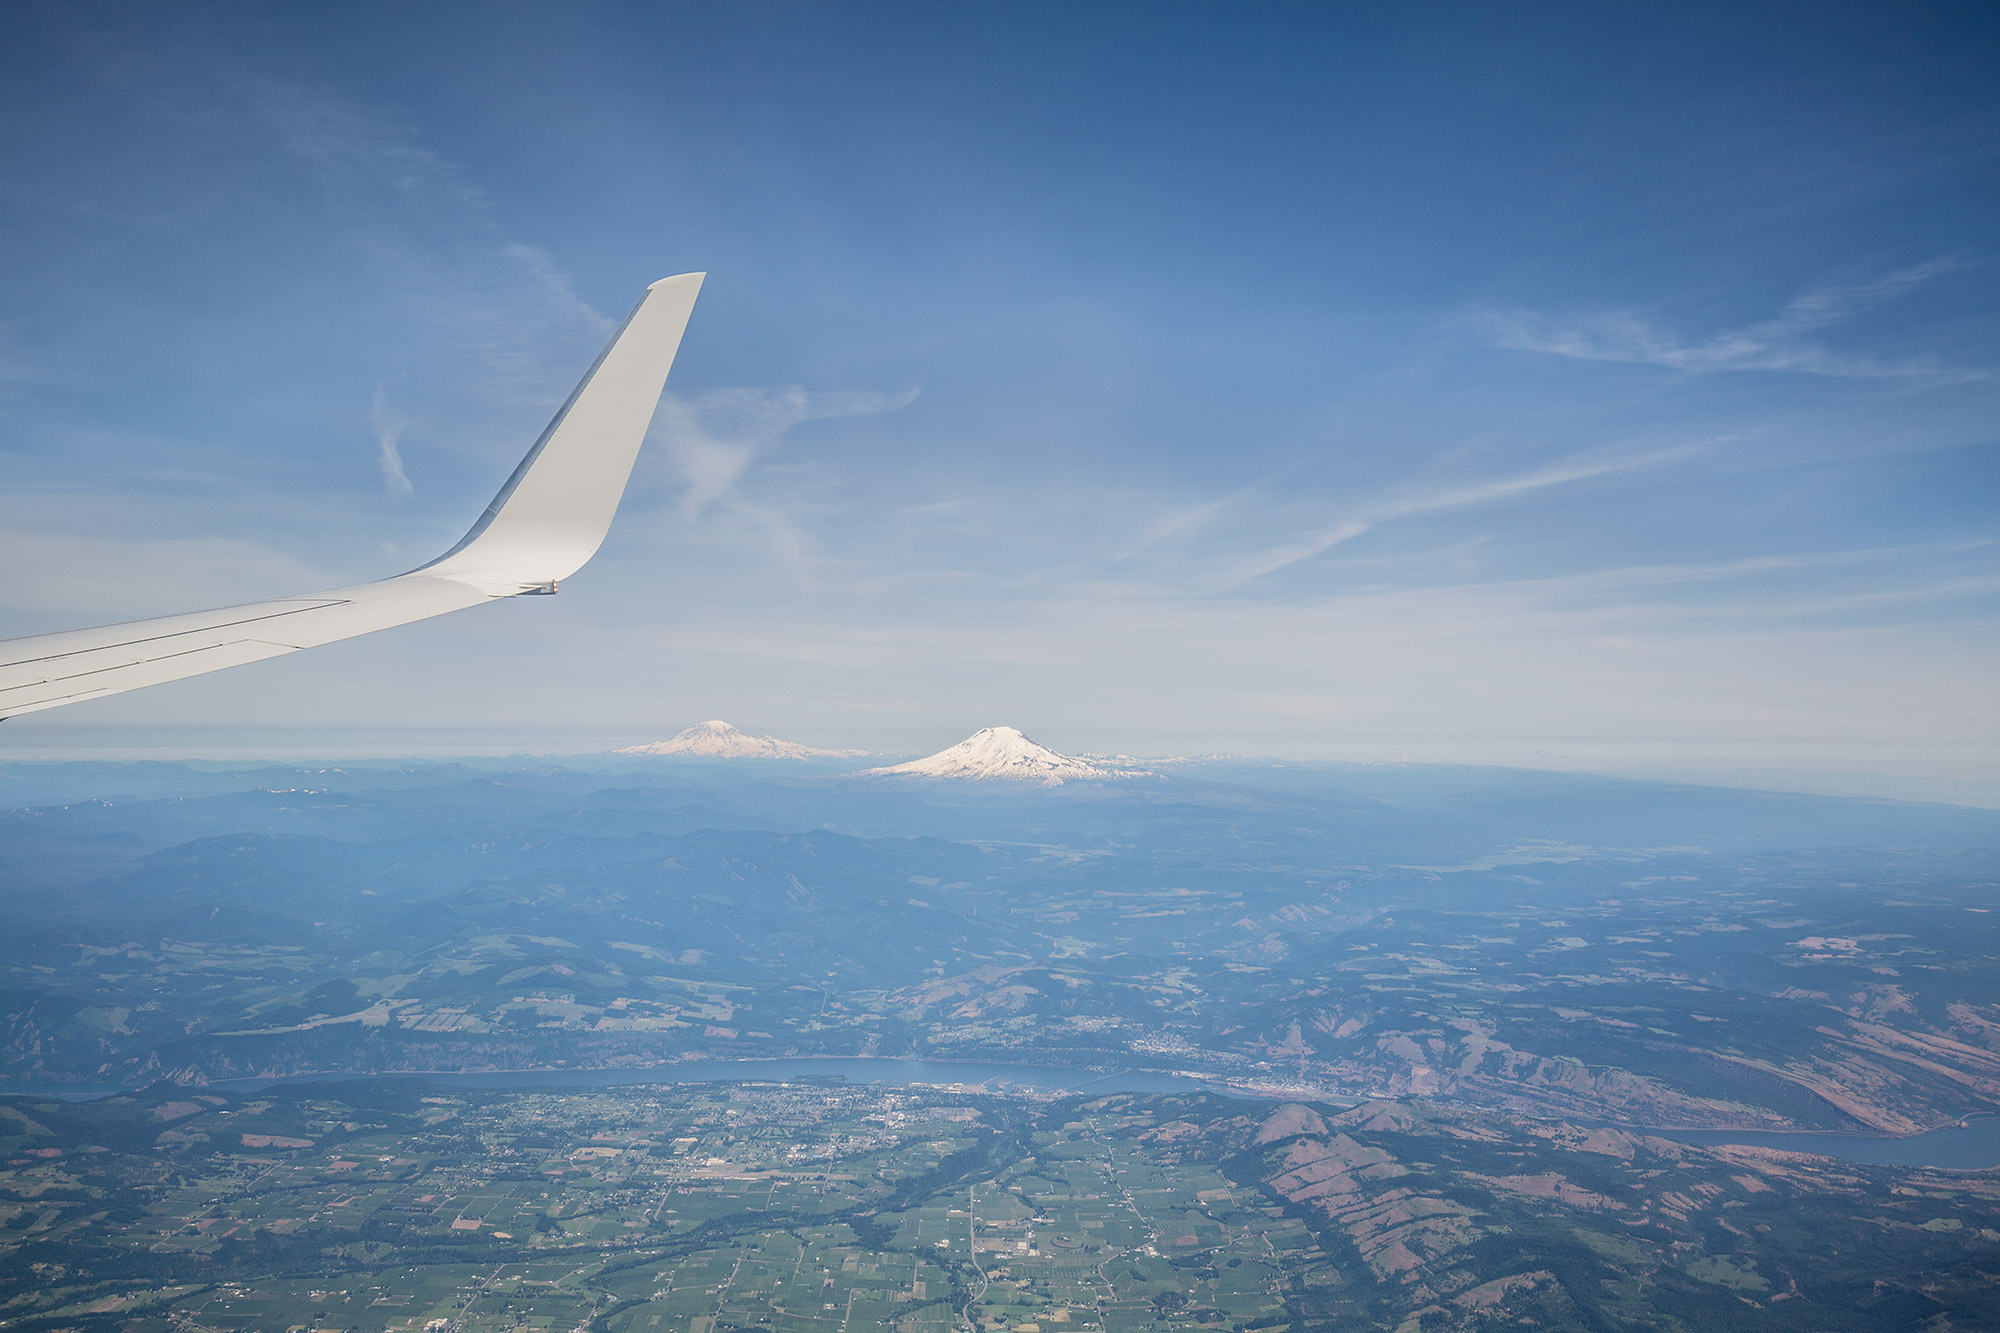 Mt Adams and Mt Saint Helens from an airline flying nearby